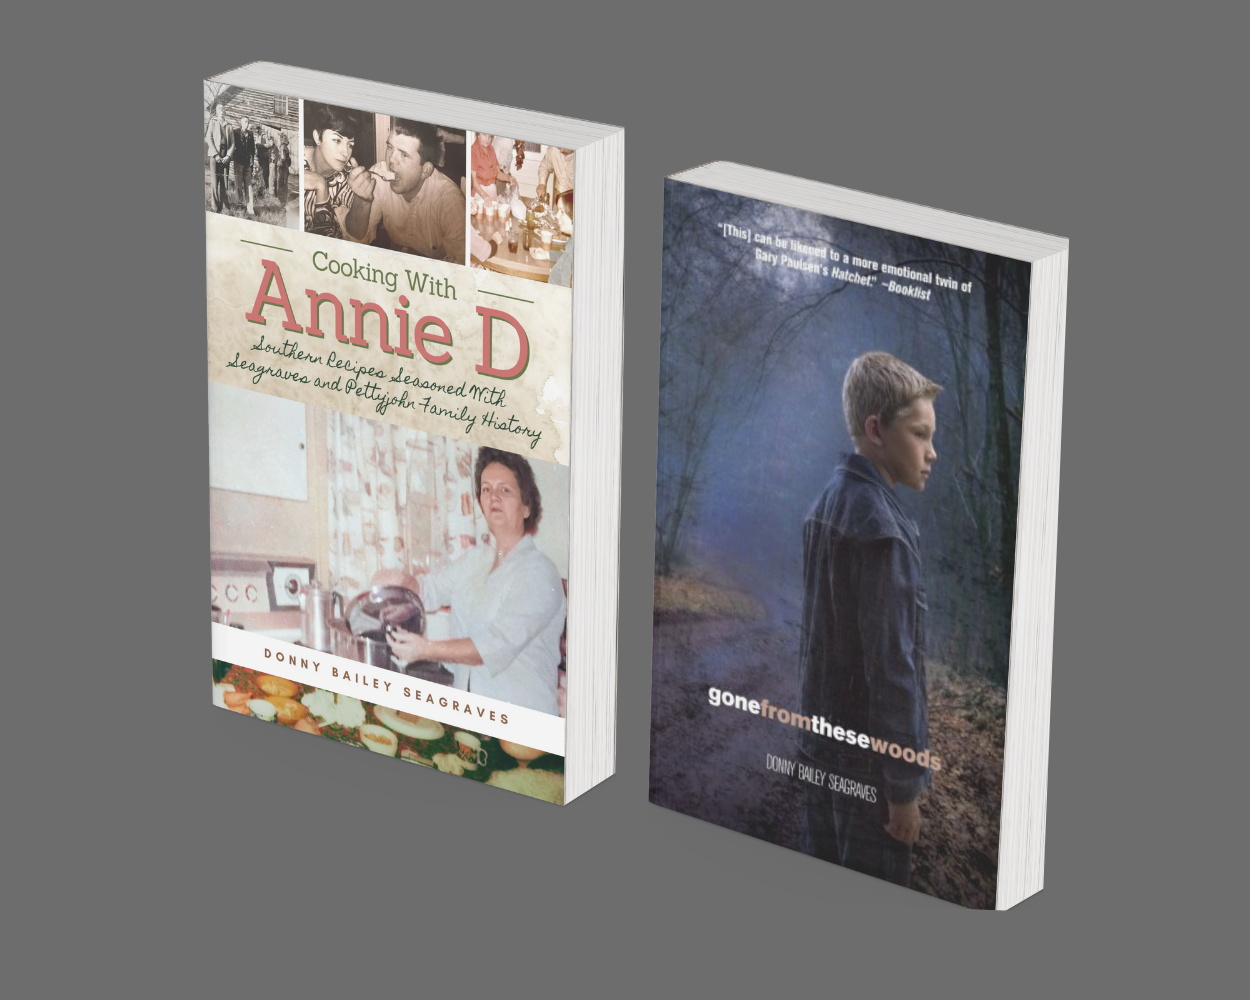 Cooking With Annie D: Southern Recipes Seasoned With Seagraves and Pettyjohn Family History and Gone From These Woods, two books by author Donny Bailey Seagraves of Athens, Georgia.